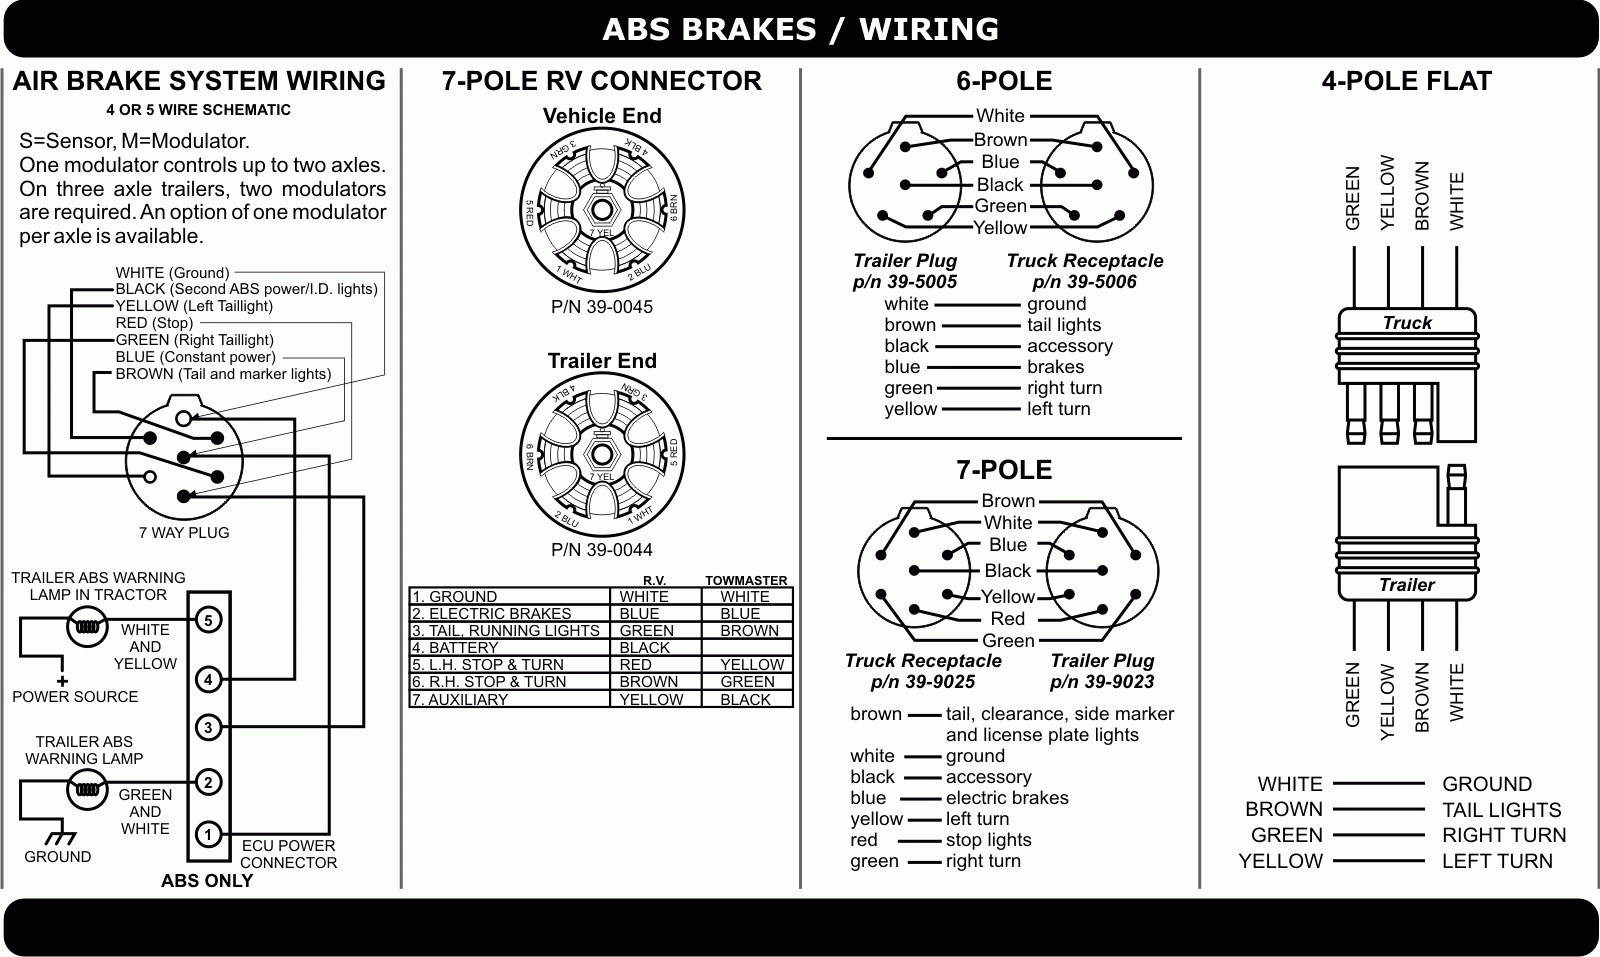 Wiring Diagram Forin Trailerlug Wire Car Electrical Connectionsoint With For 7 Pin Trailer Plug Australia Connector